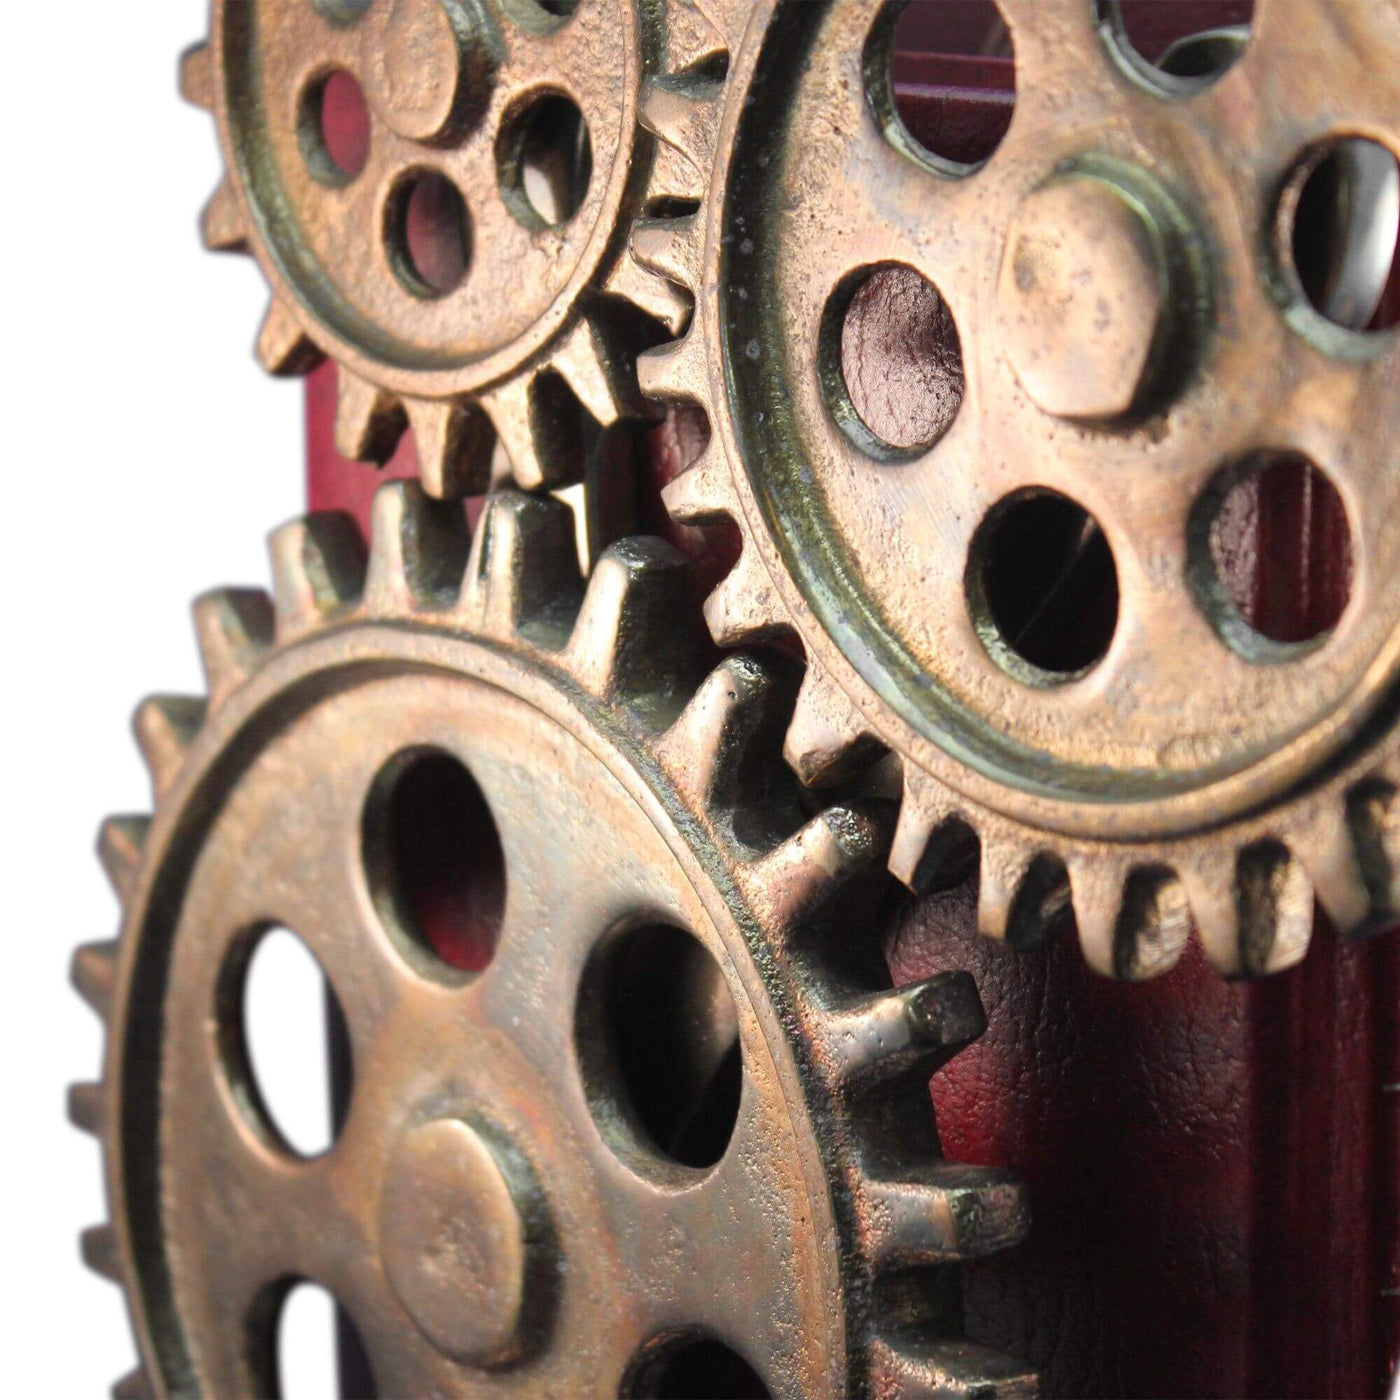 Premium Steampunk Bicycle Sprocket Bookends - Metal Cogs Gears - Pair in partnership with Rustic Deco Incorporated